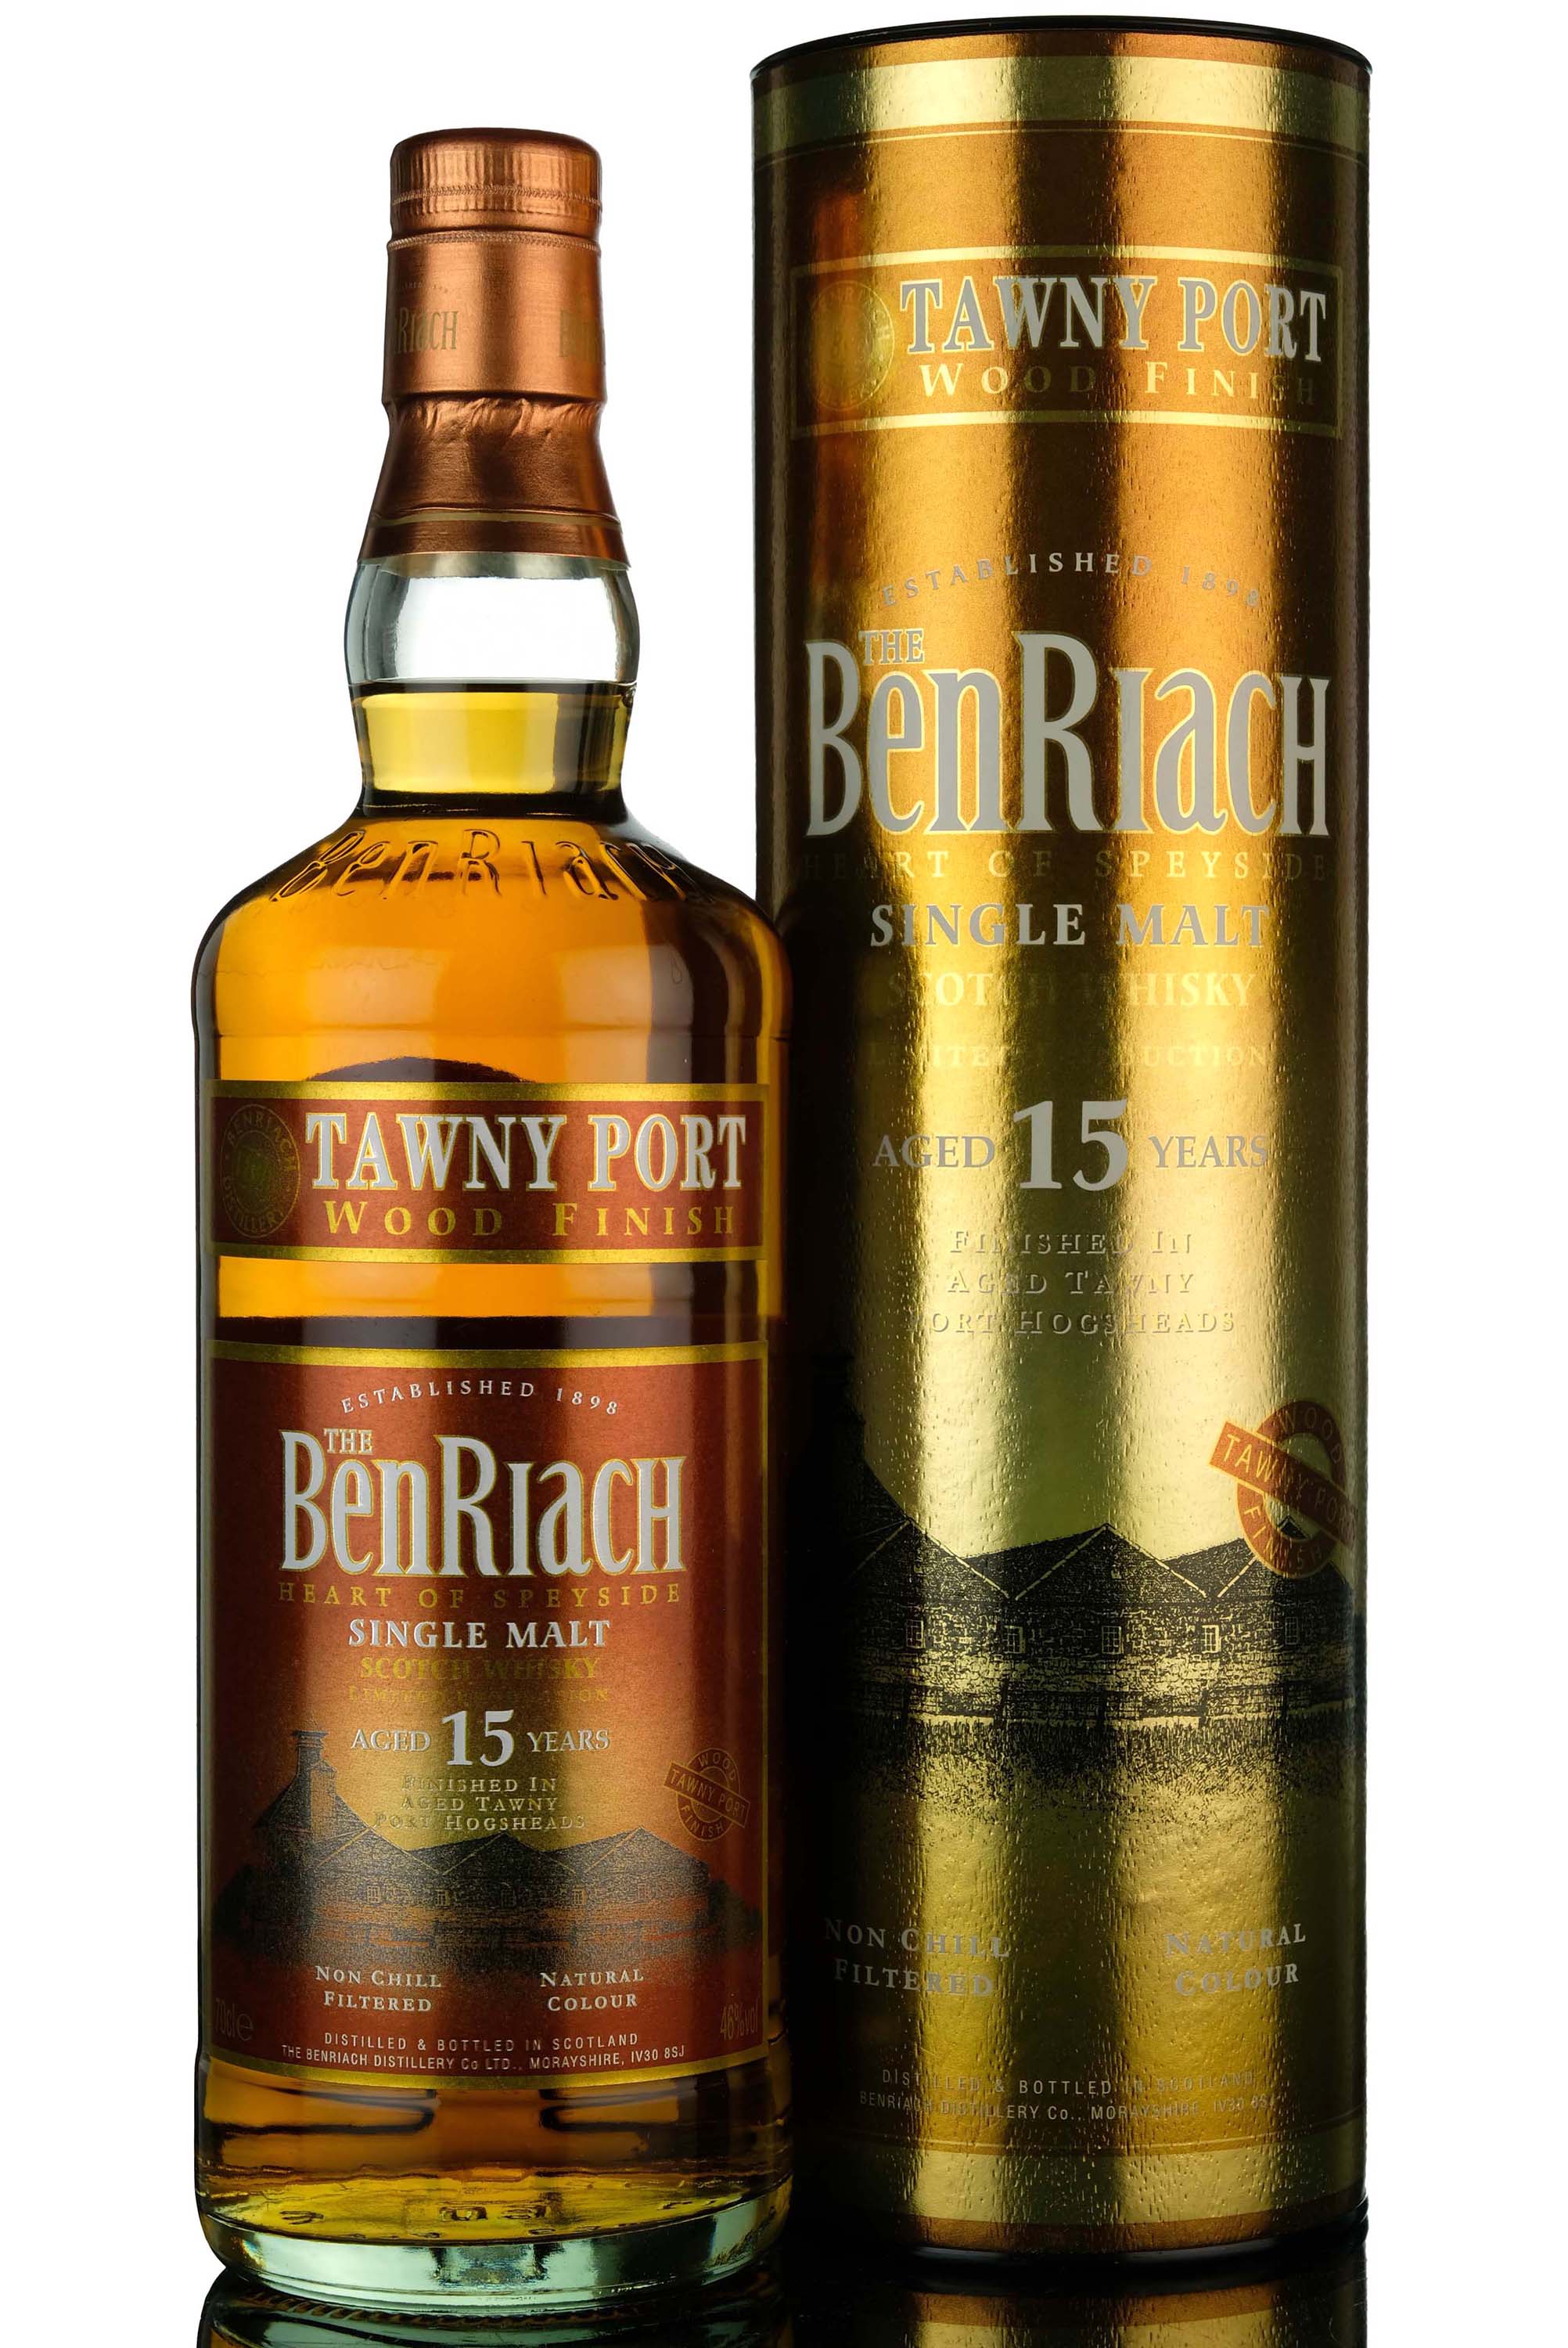 Benriach 15 Year Old - Tawny Port Wood Finish